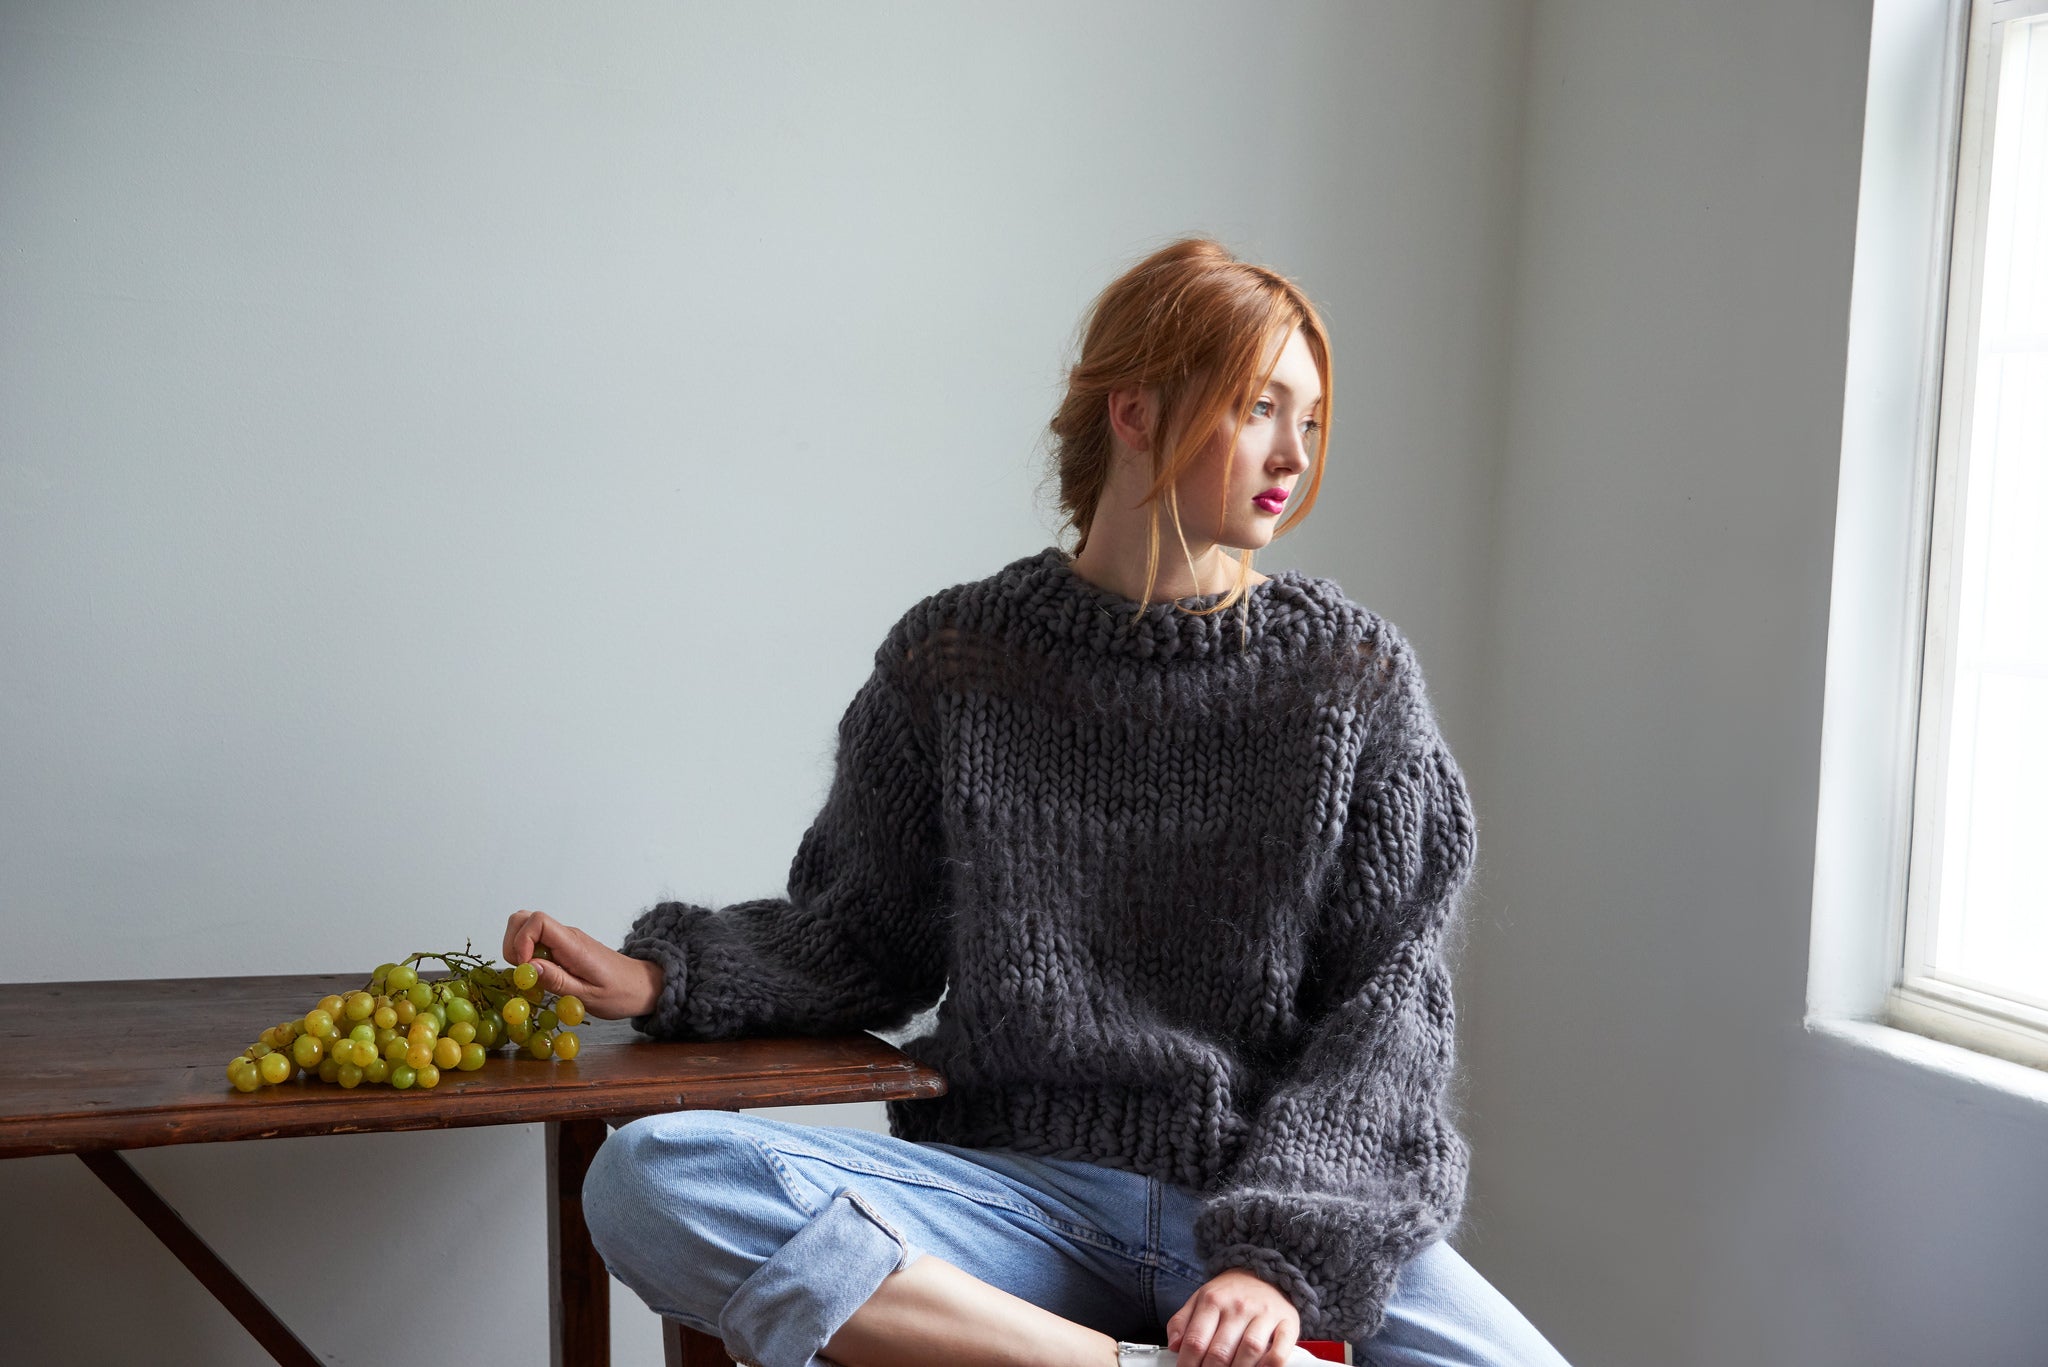 Top-Down Sweater PATTERN - Mohair So Soft – Loopy Mango